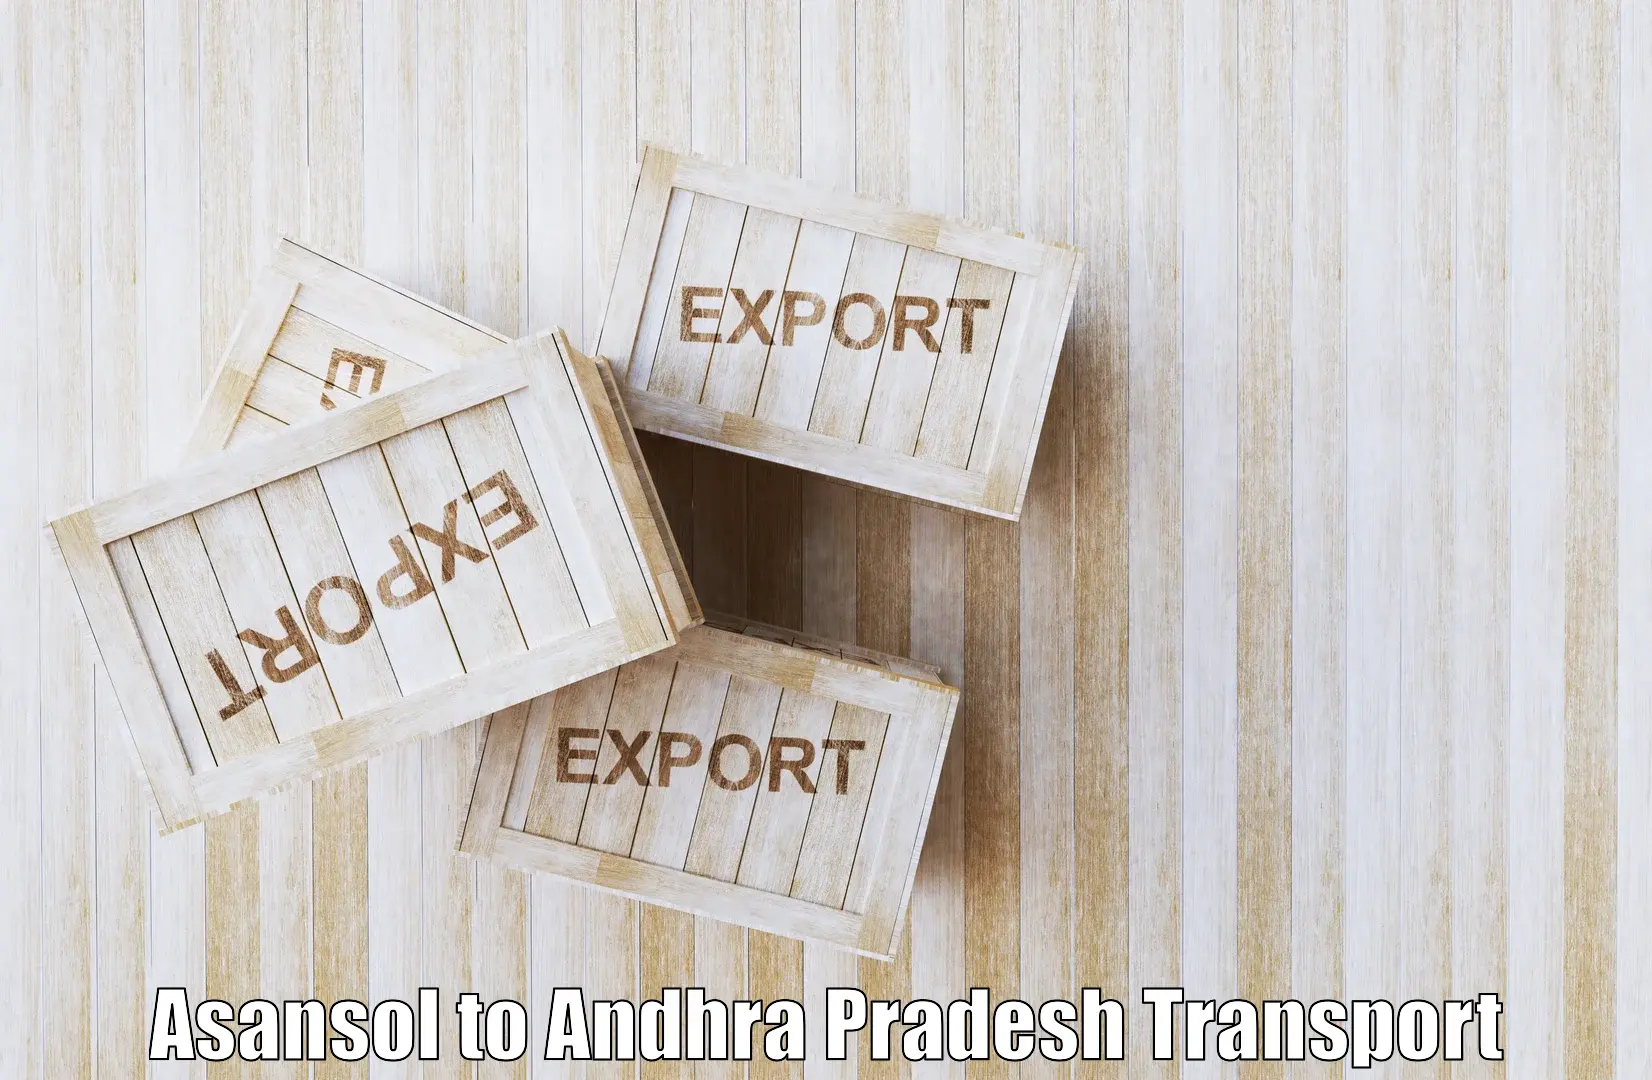 Container transport service Asansol to Chintapalli